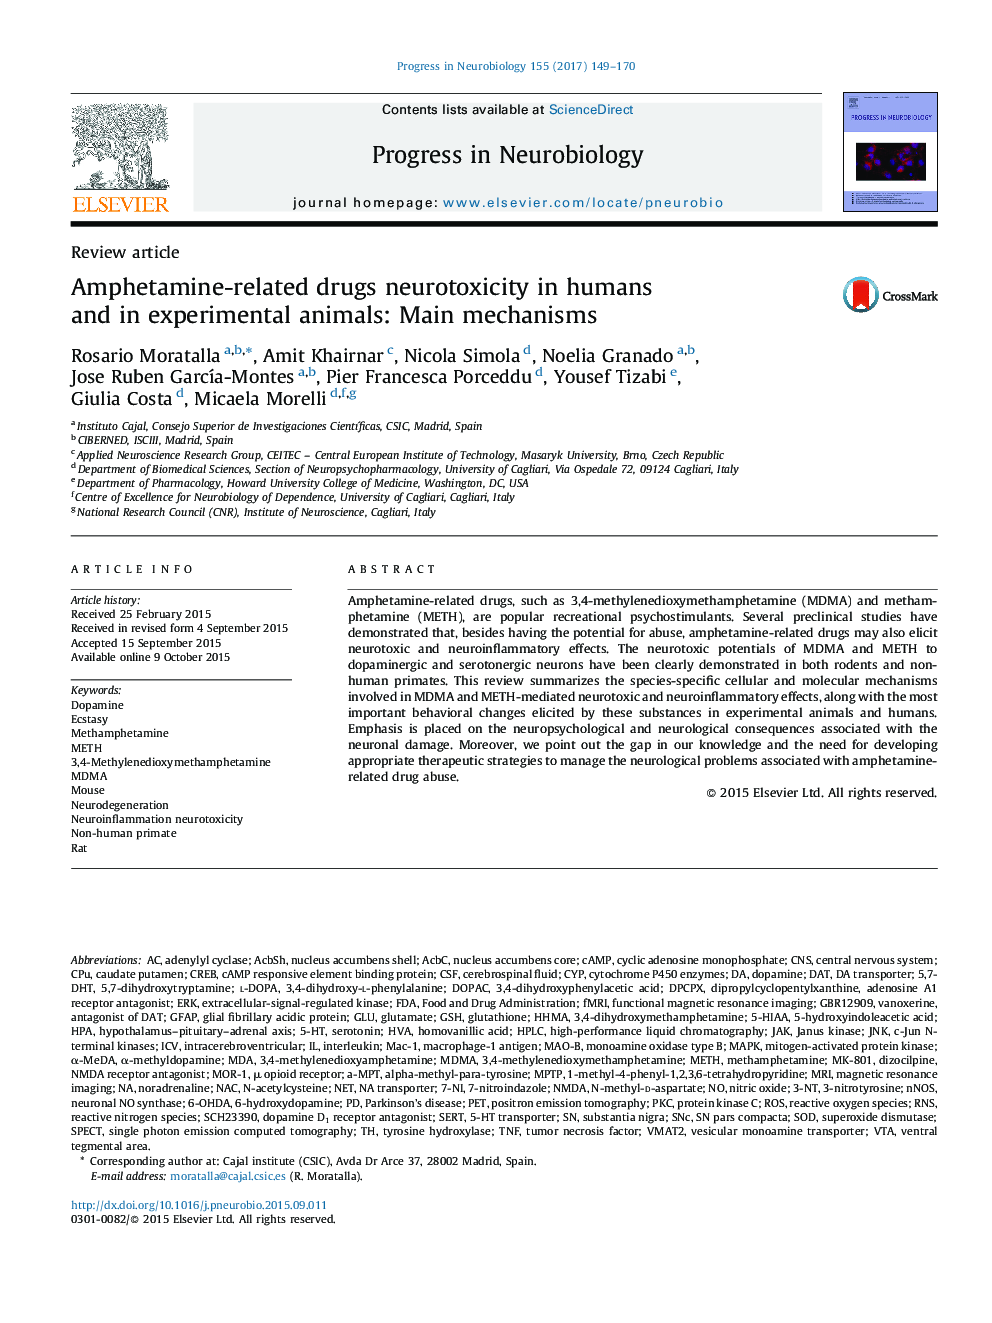 Amphetamine-related drugs neurotoxicity in humans and in experimental animals: Main mechanisms